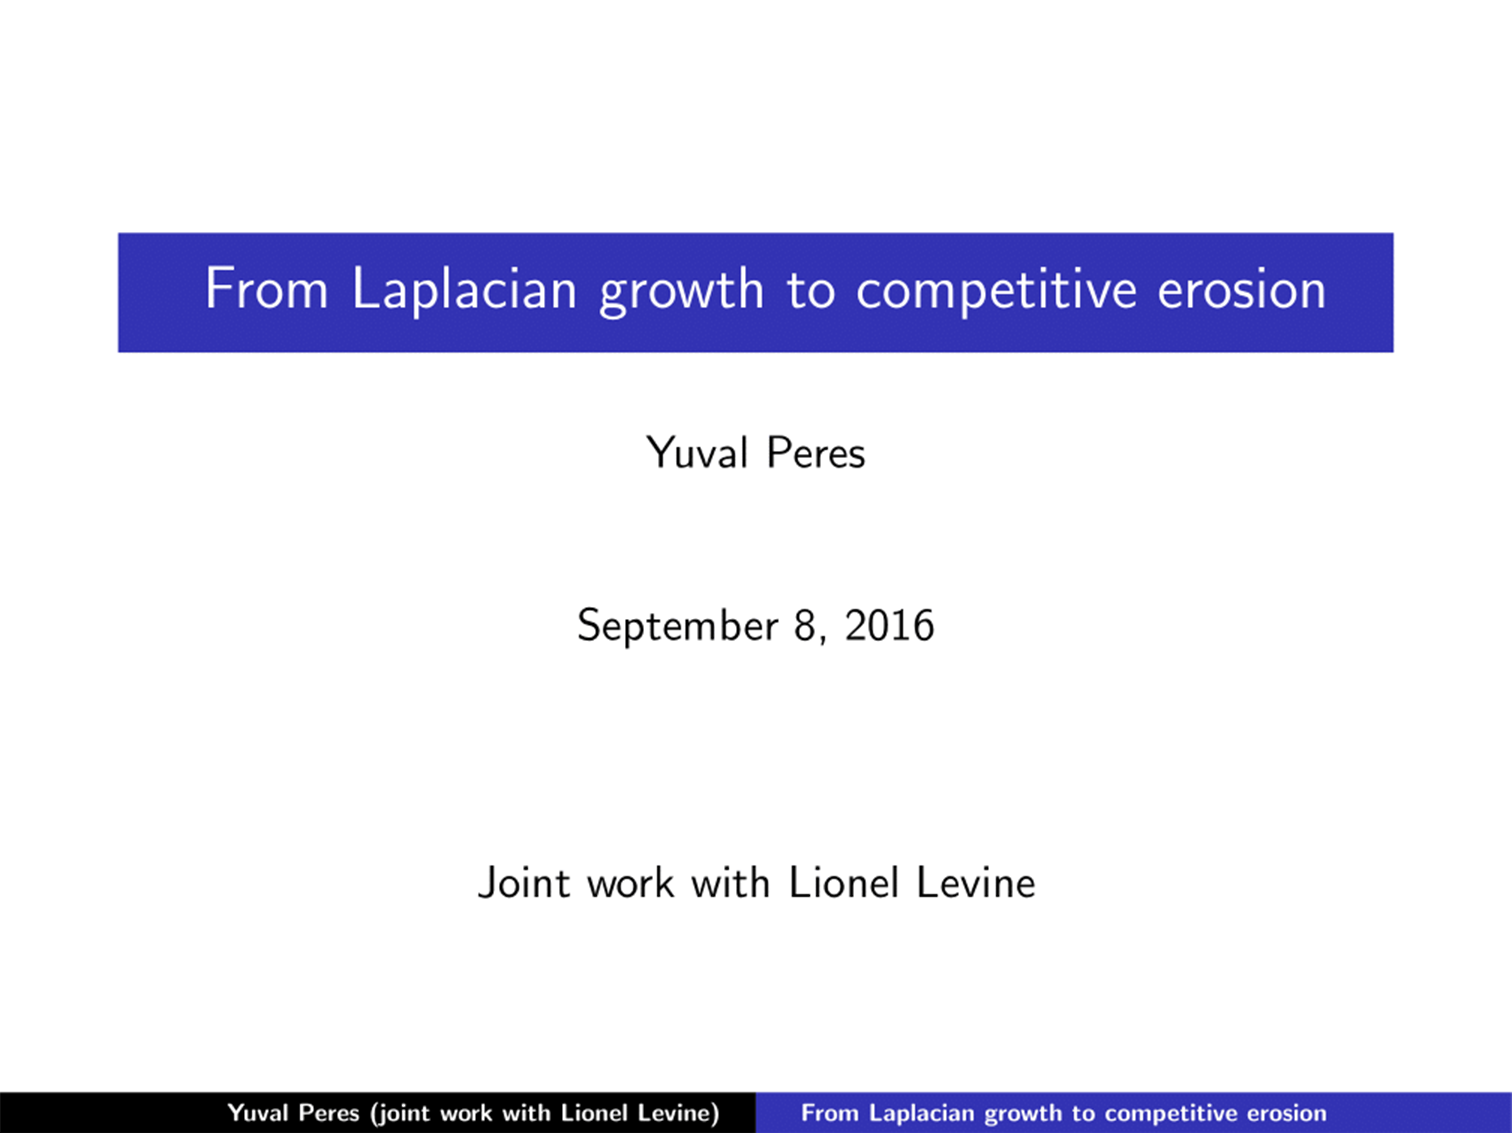 1 - From Laplacian growth to Competitive Erosion